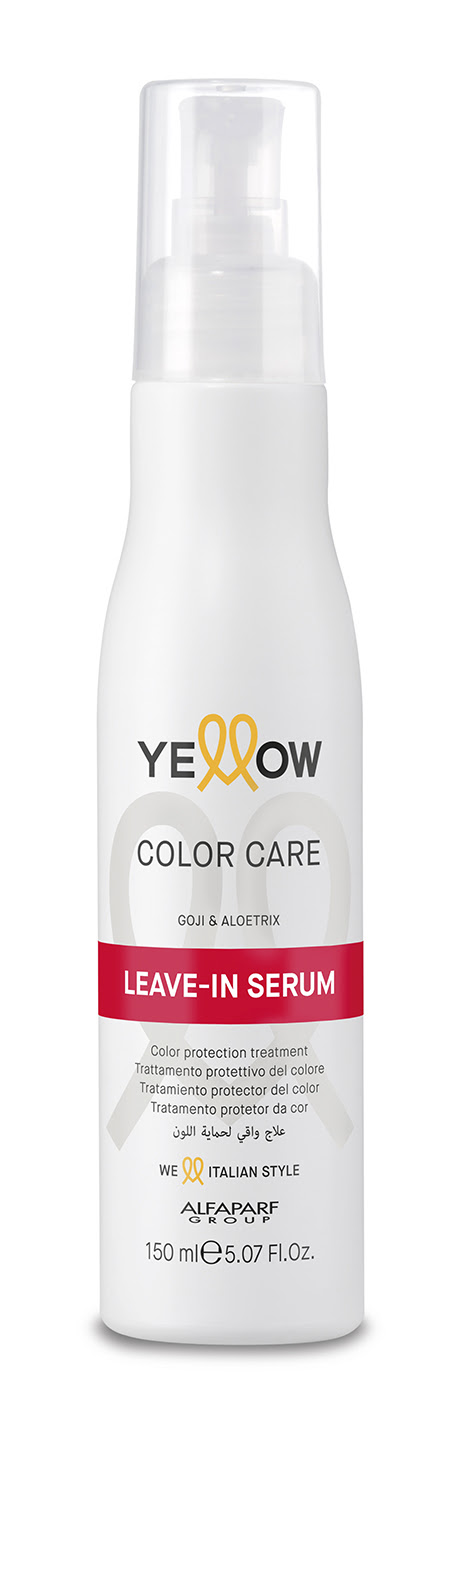 Leave in Color Care Yellow